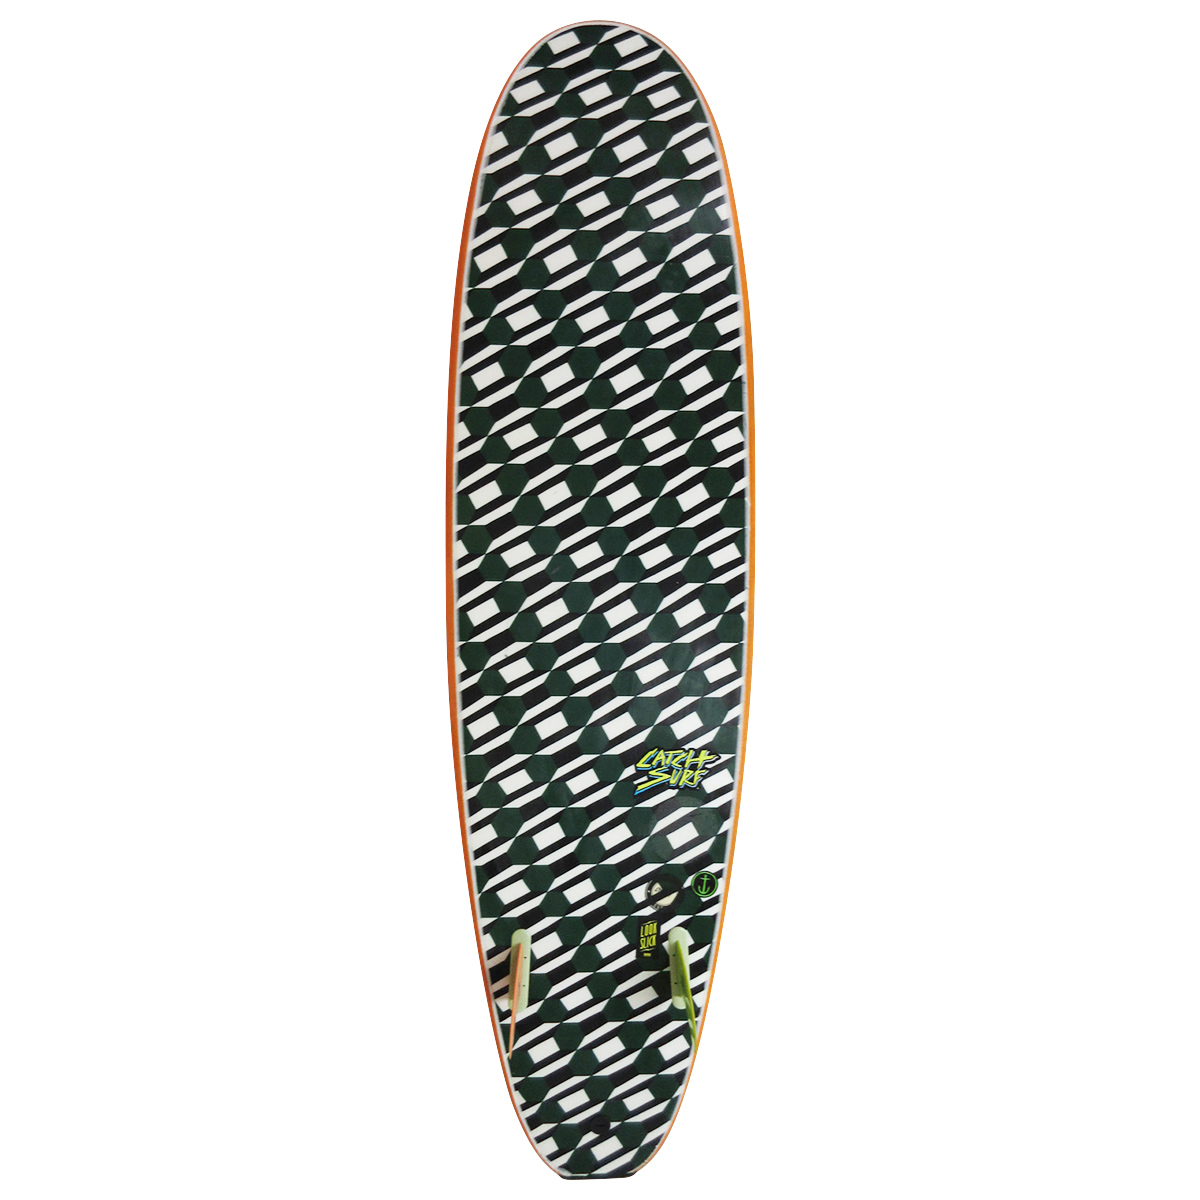 CATCH SURF / BARRY MCGEE DFW EDITION 7.0 SIDE BITE FIN